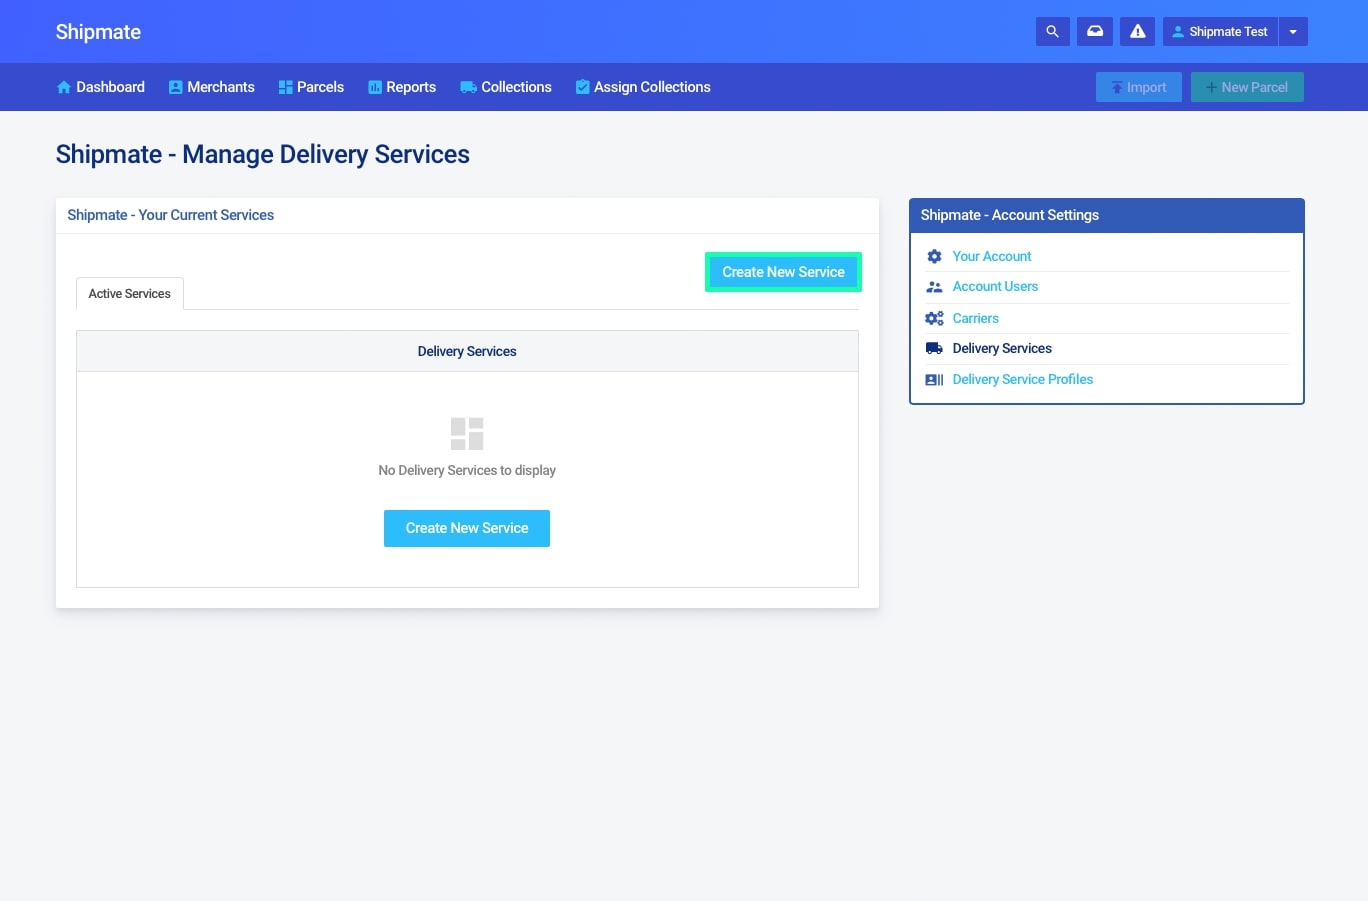 Shipmate - Your Account - Adding a Delivery Service